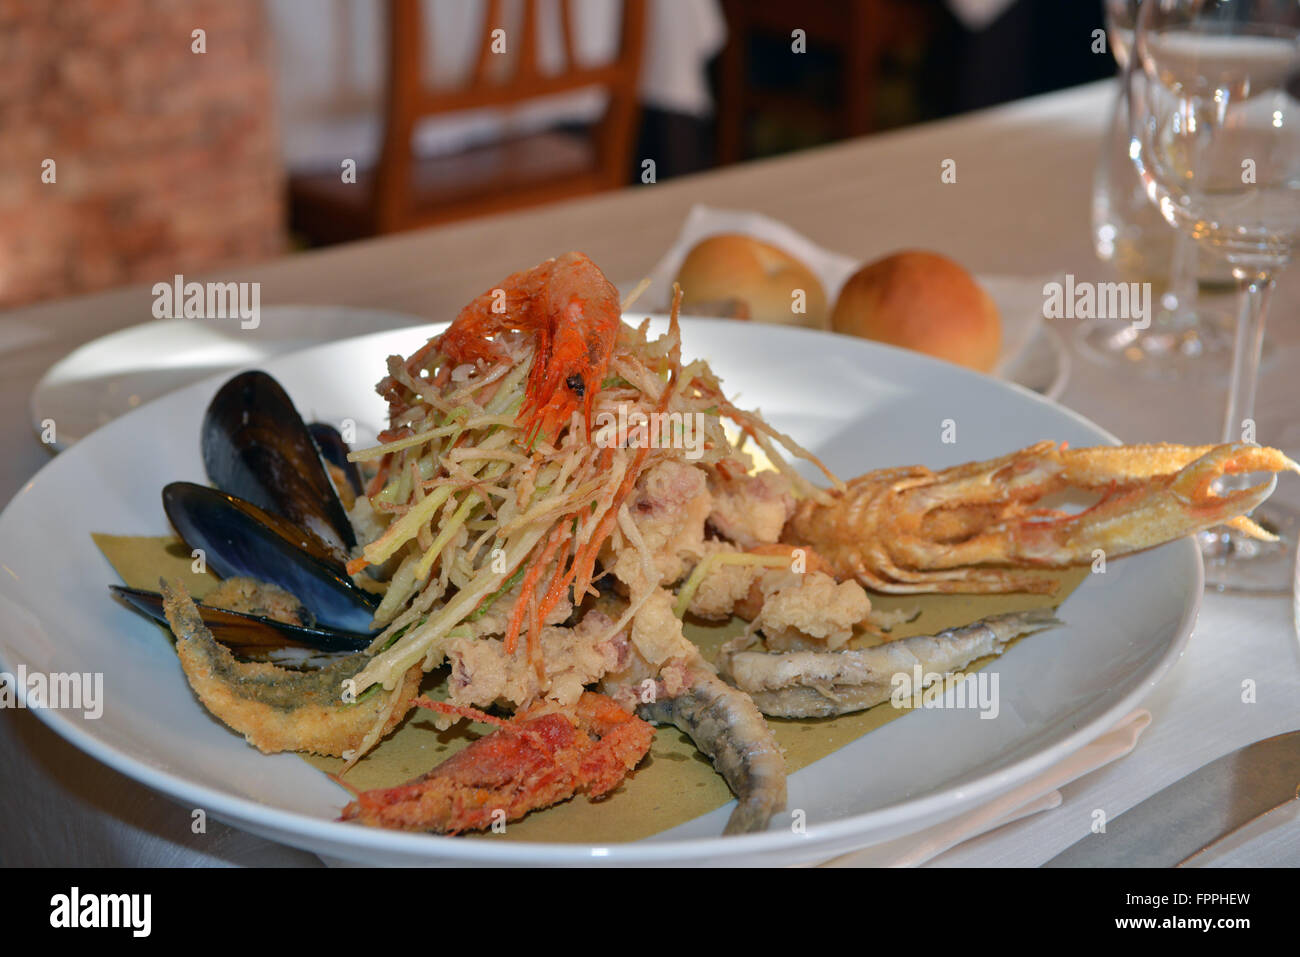 photography stock - and images hi-res misto Fritto platter and seafood fish Alamy